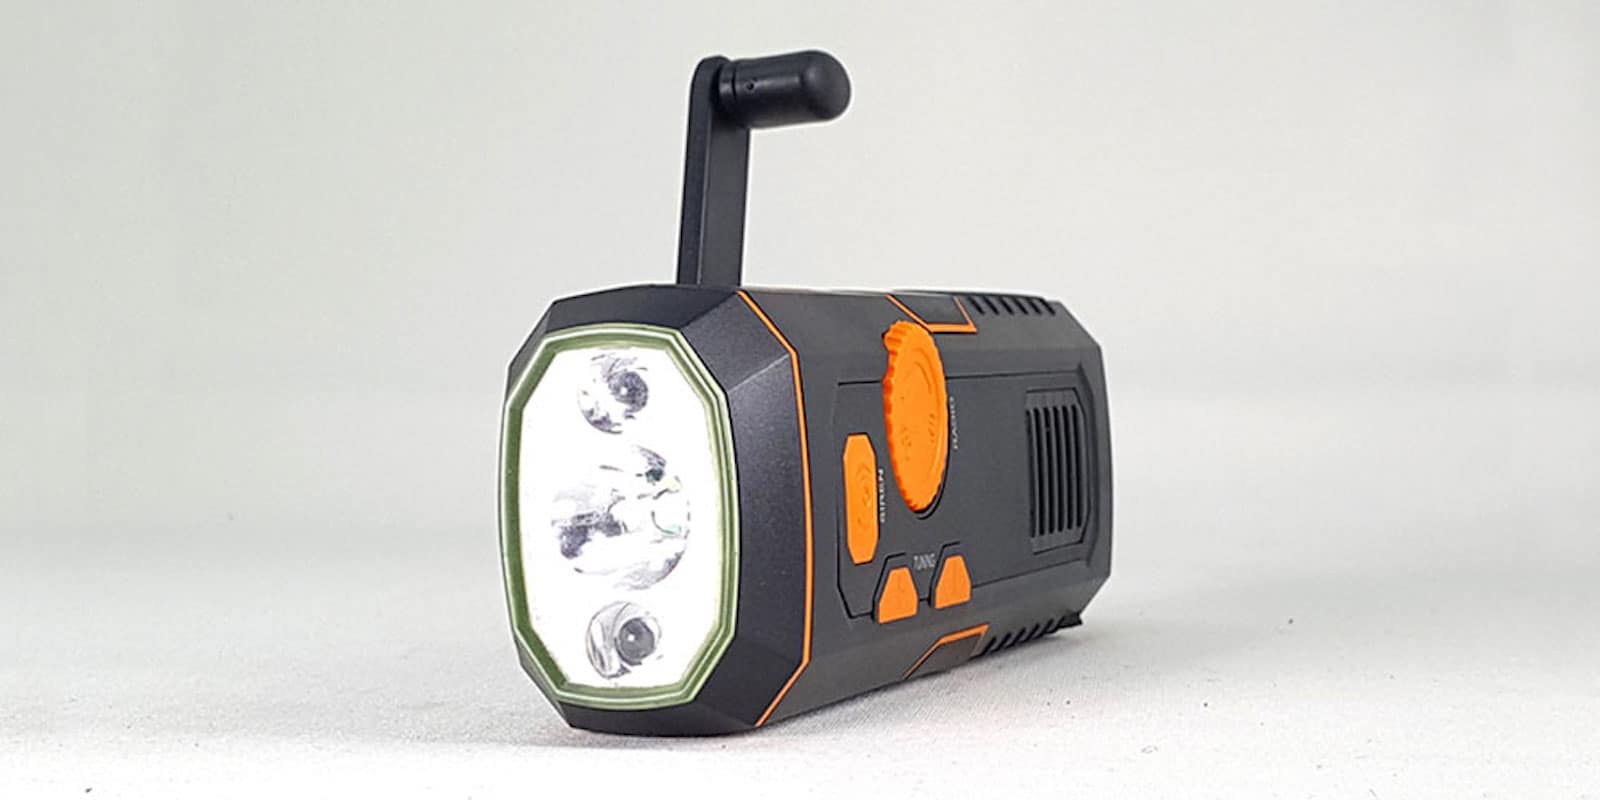 Be prepared for the unexpected with this self-powered lamp that doubles as an FM radio.